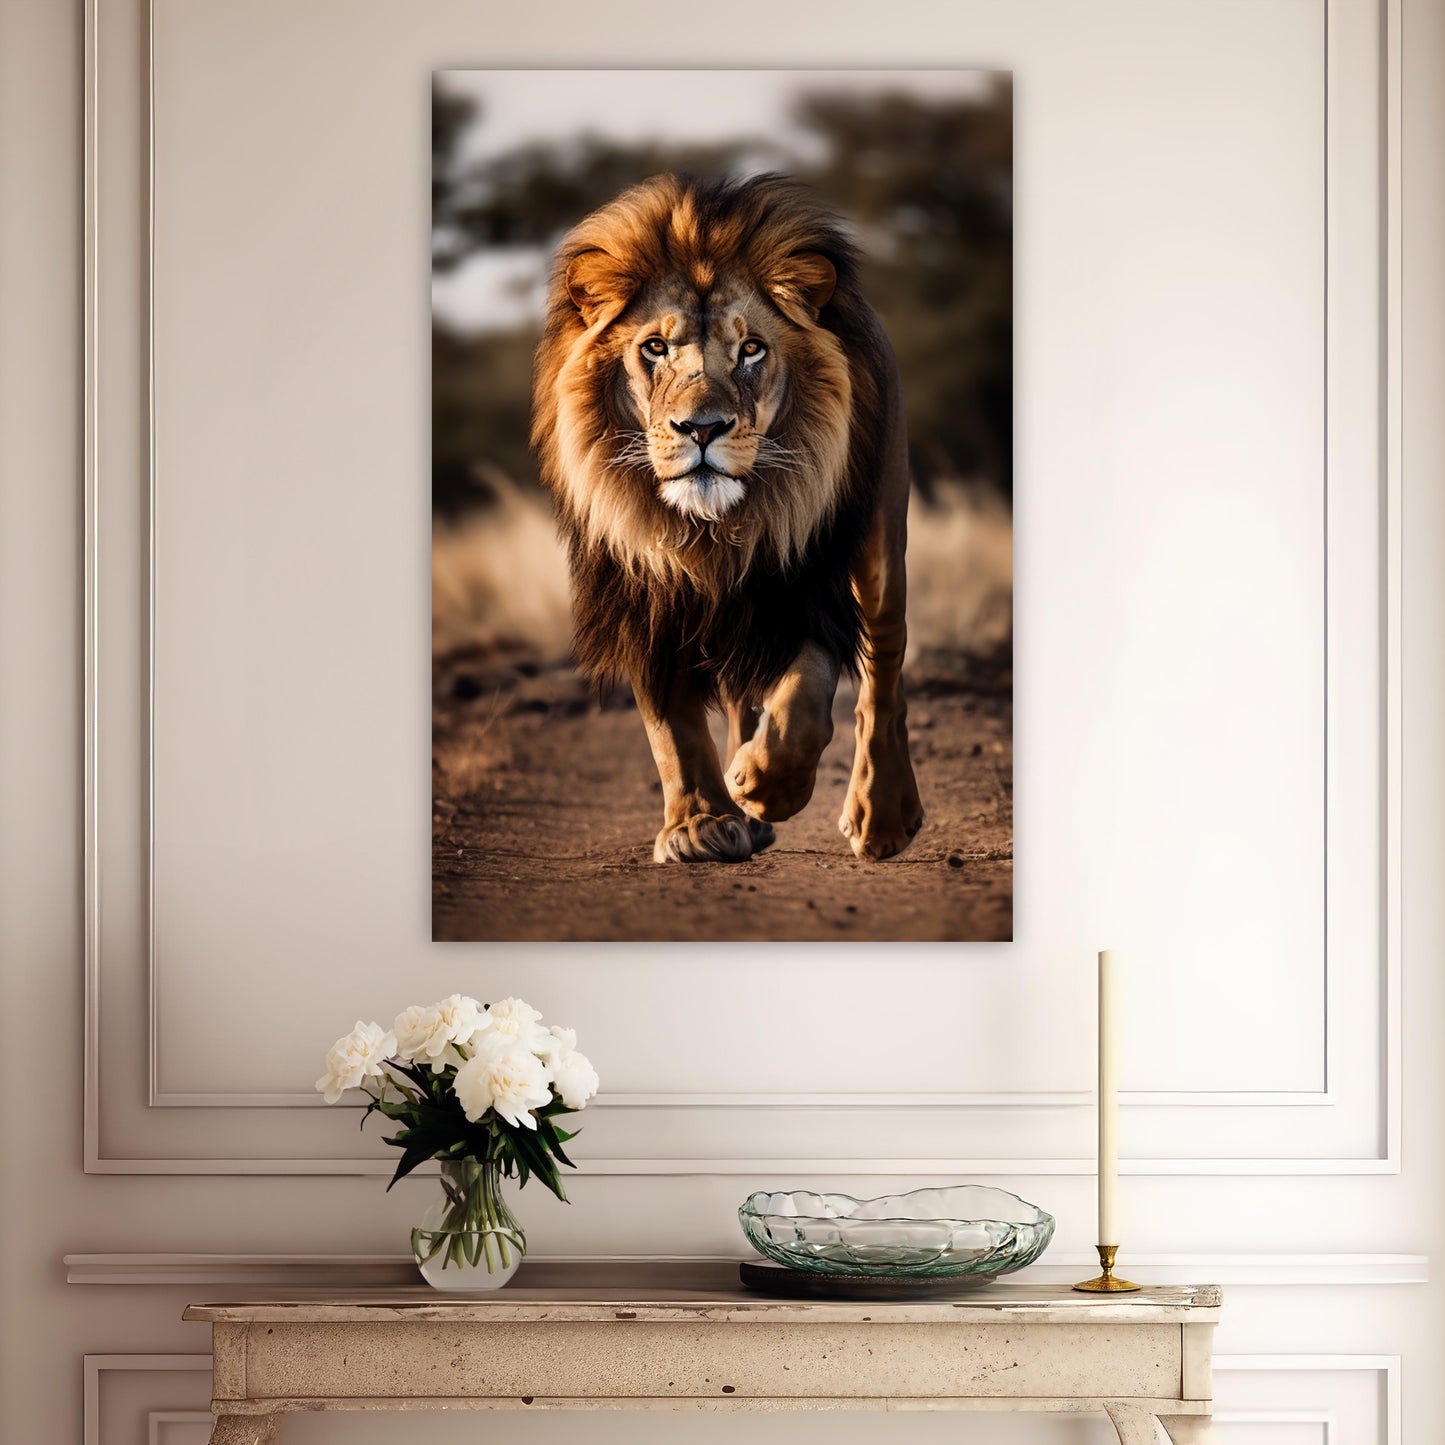 lion aesthetic wall decor painting, lion wall decor gift ideas